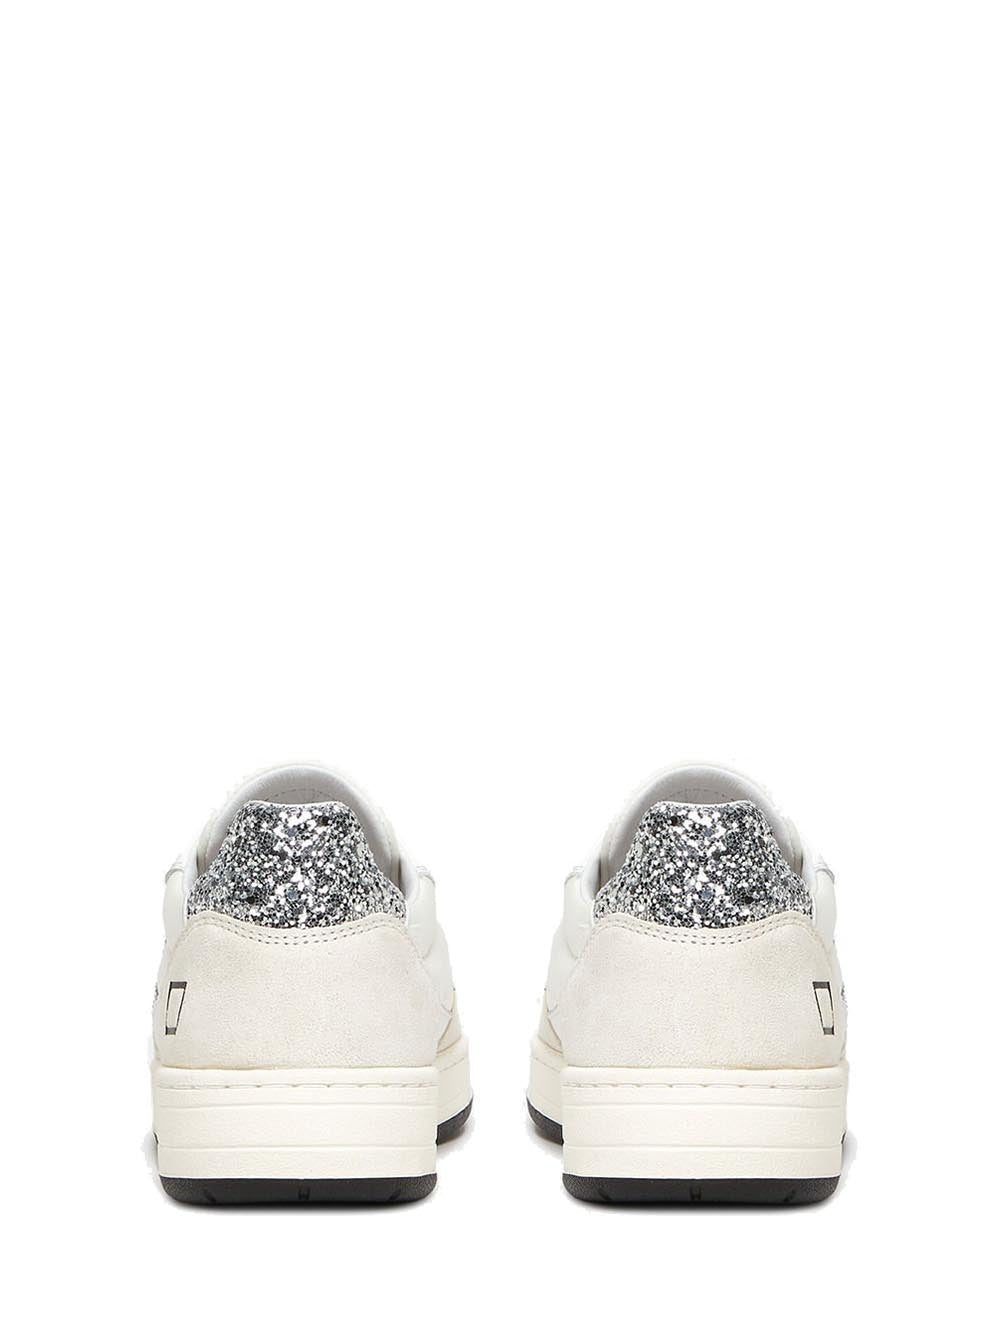 D.A.T.E. Sneakers Donna Bianco argento